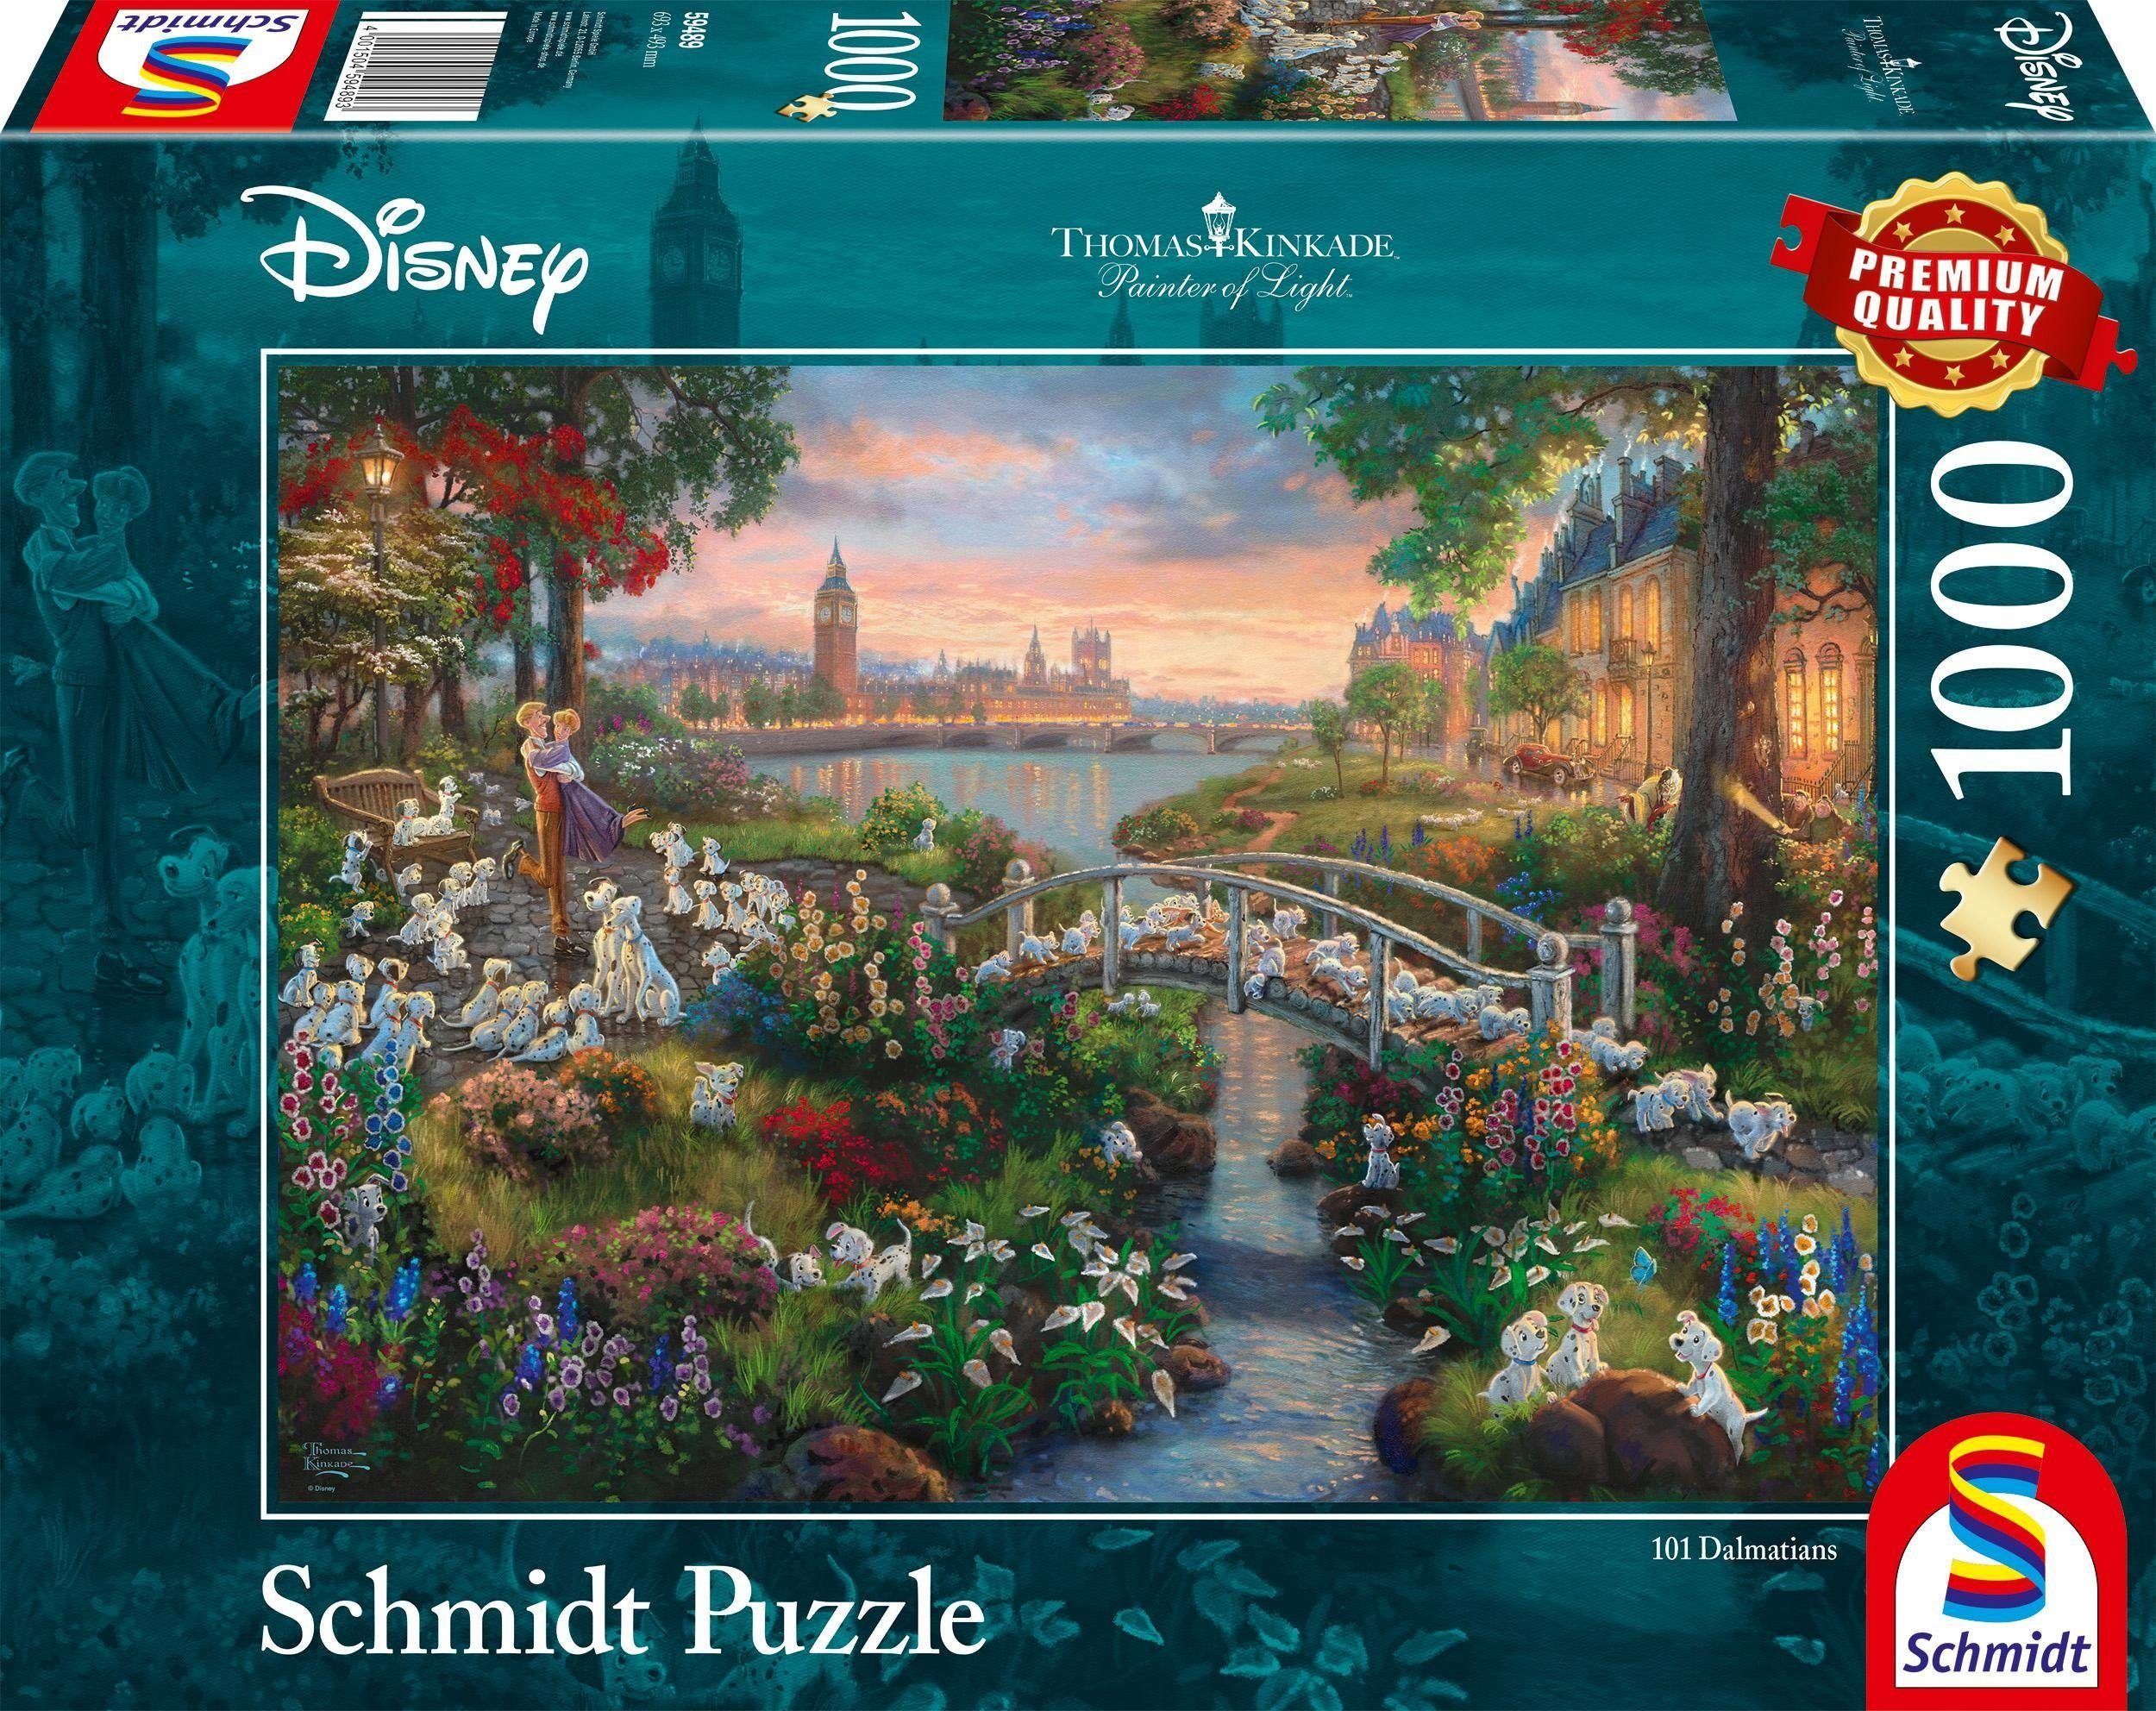 Schmidt Spiele Puzzle Disney, 101 Dalmatiner, 1000 Puzzleteile, Made in Germany